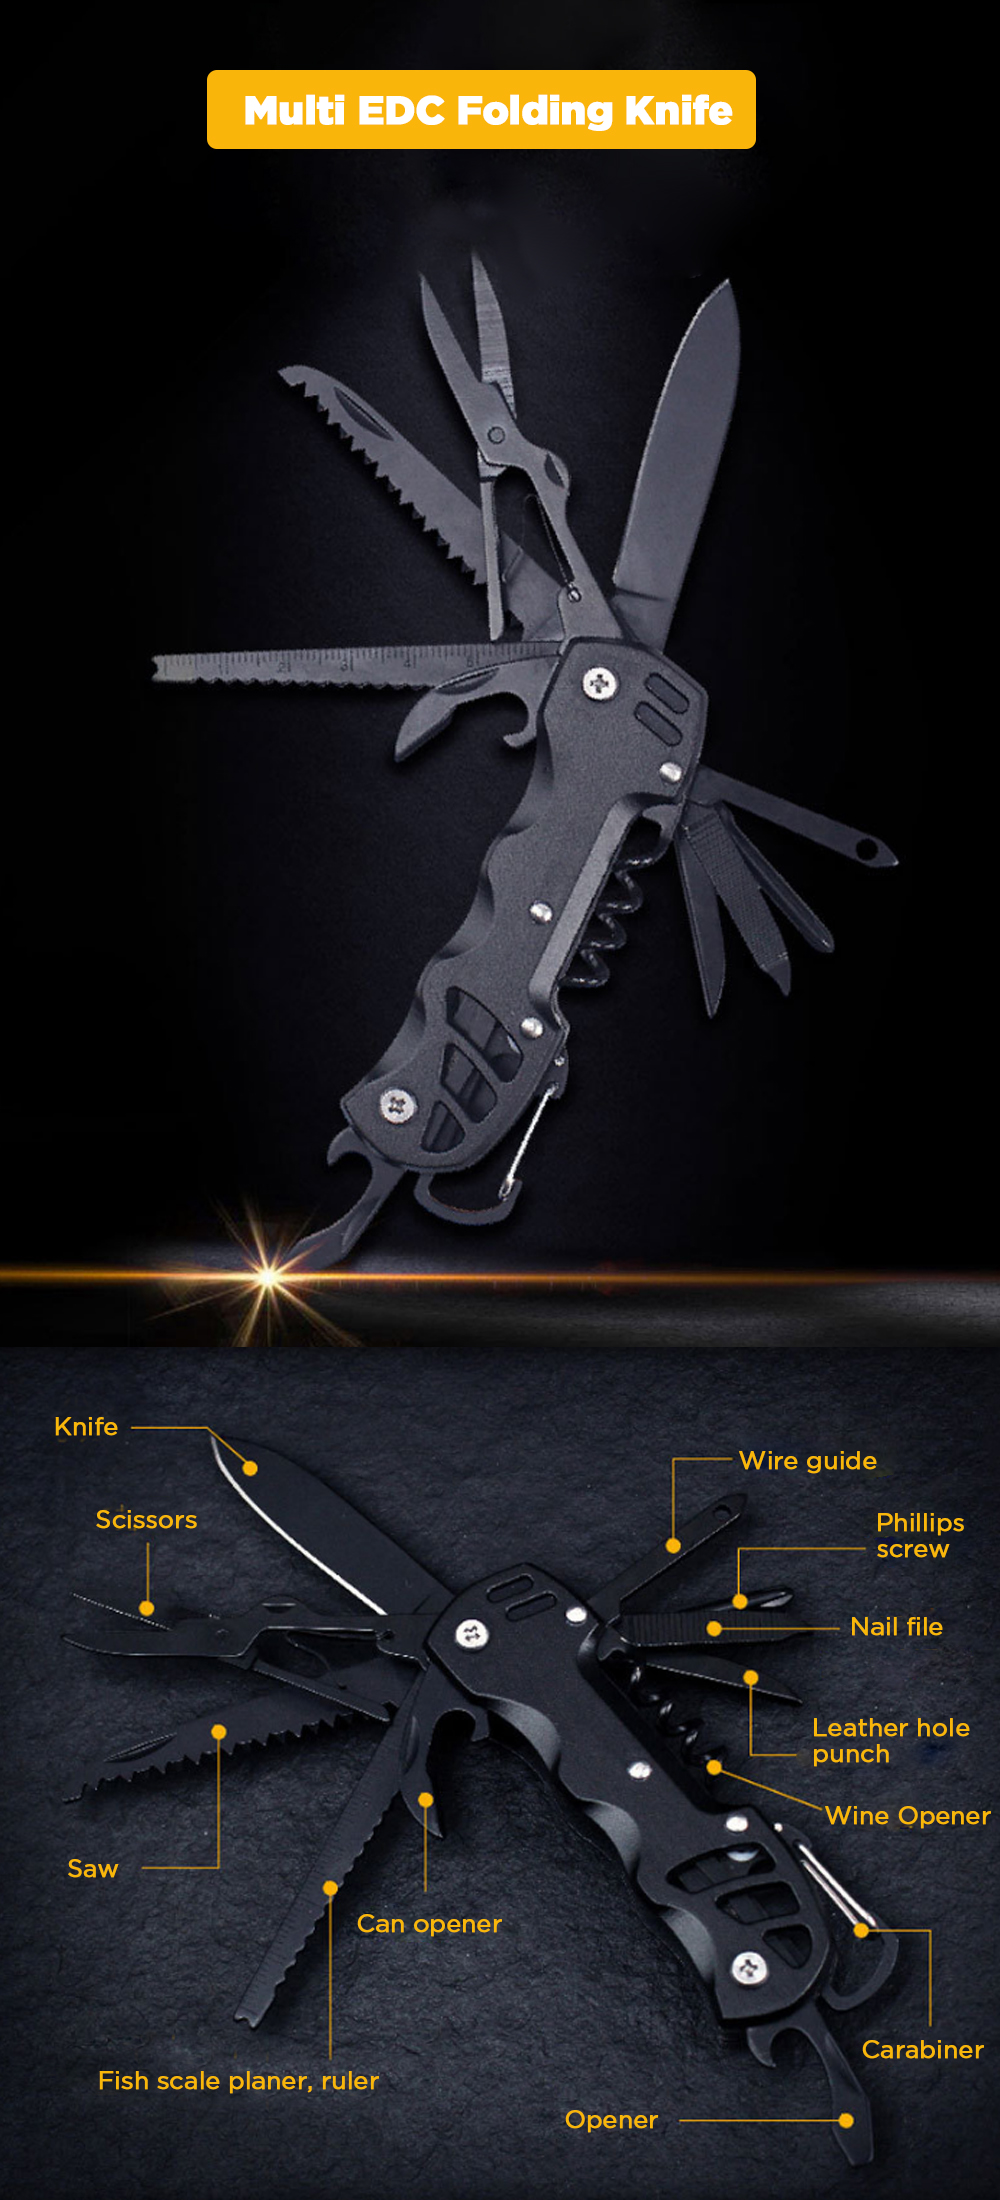 15-in-1-Multifunction-Folding-Knife-EDC-Survival-Tools-Saw-Scissors-Opener-Carabiner-Screwdriver-Out-1739966-1